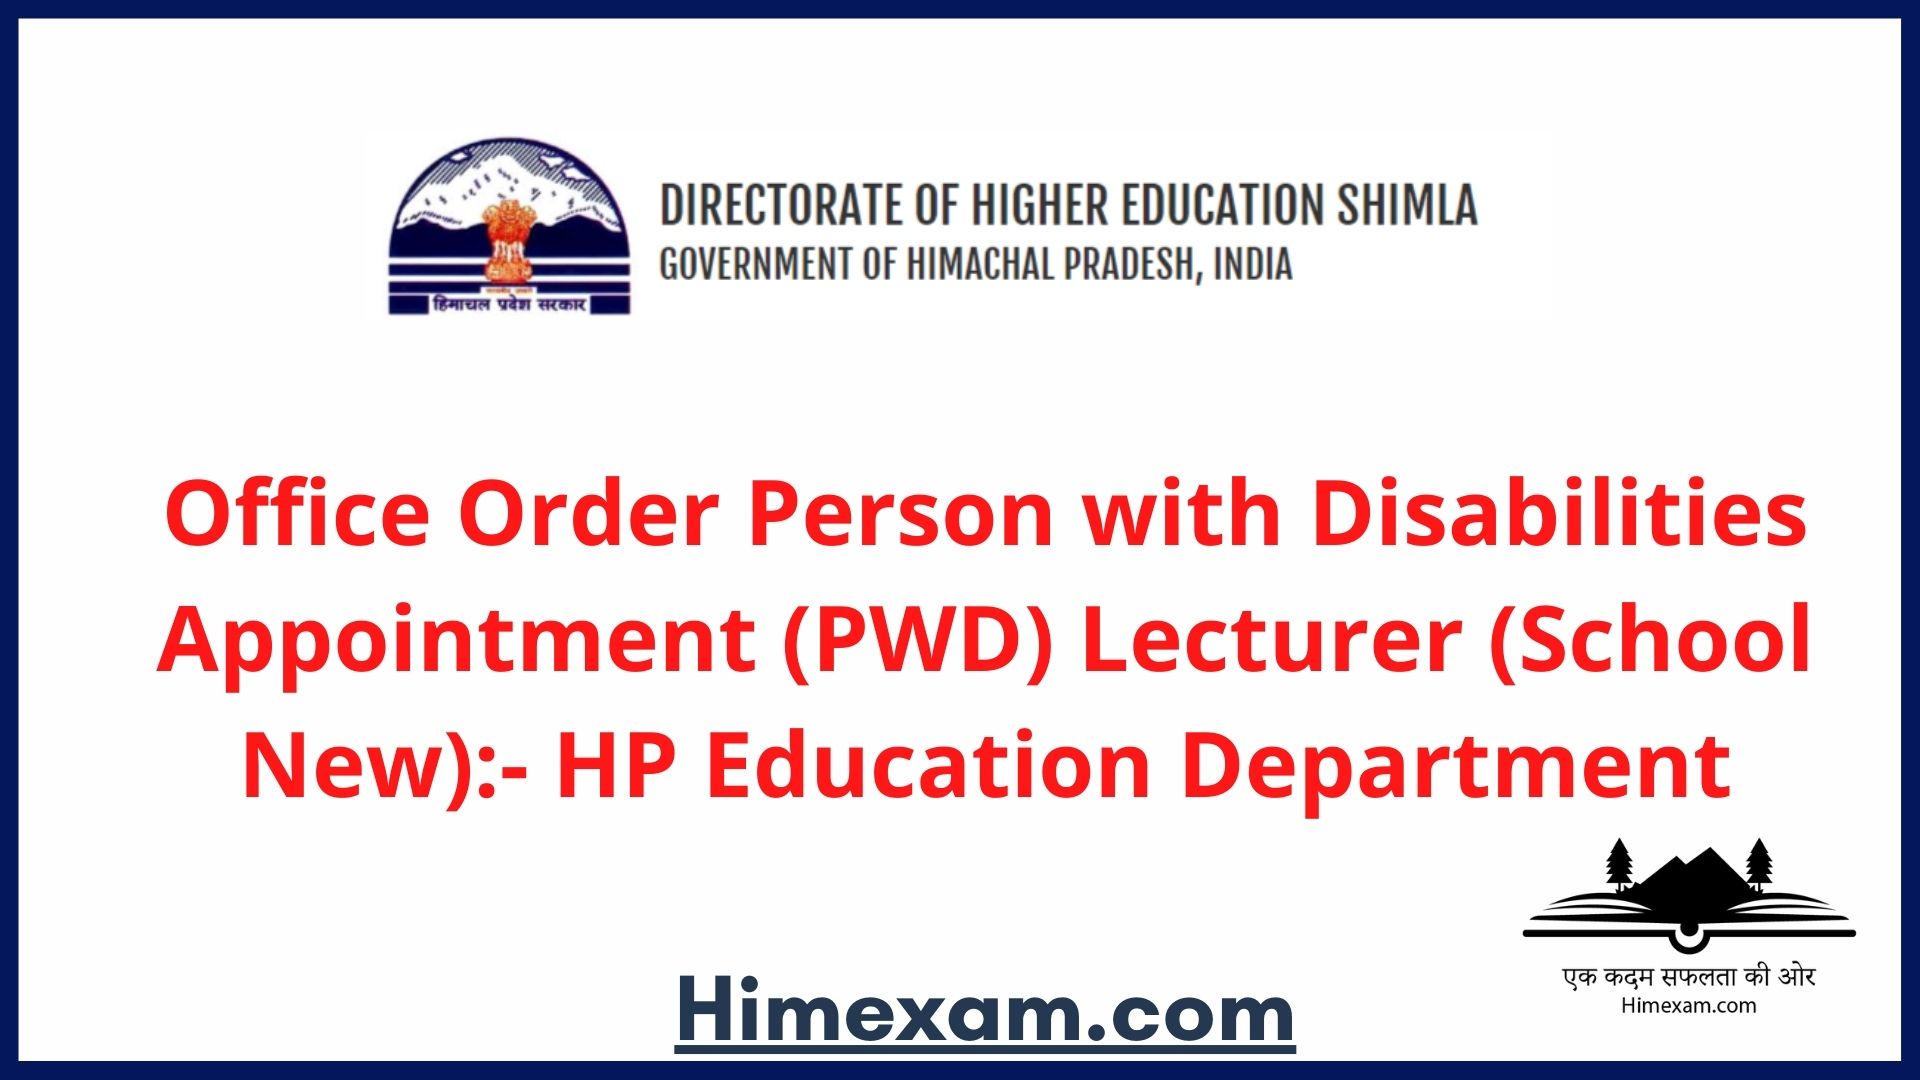 Office Order Person with Disabilities Appointment (PWD) Lecturer (School New):- HP Education Department